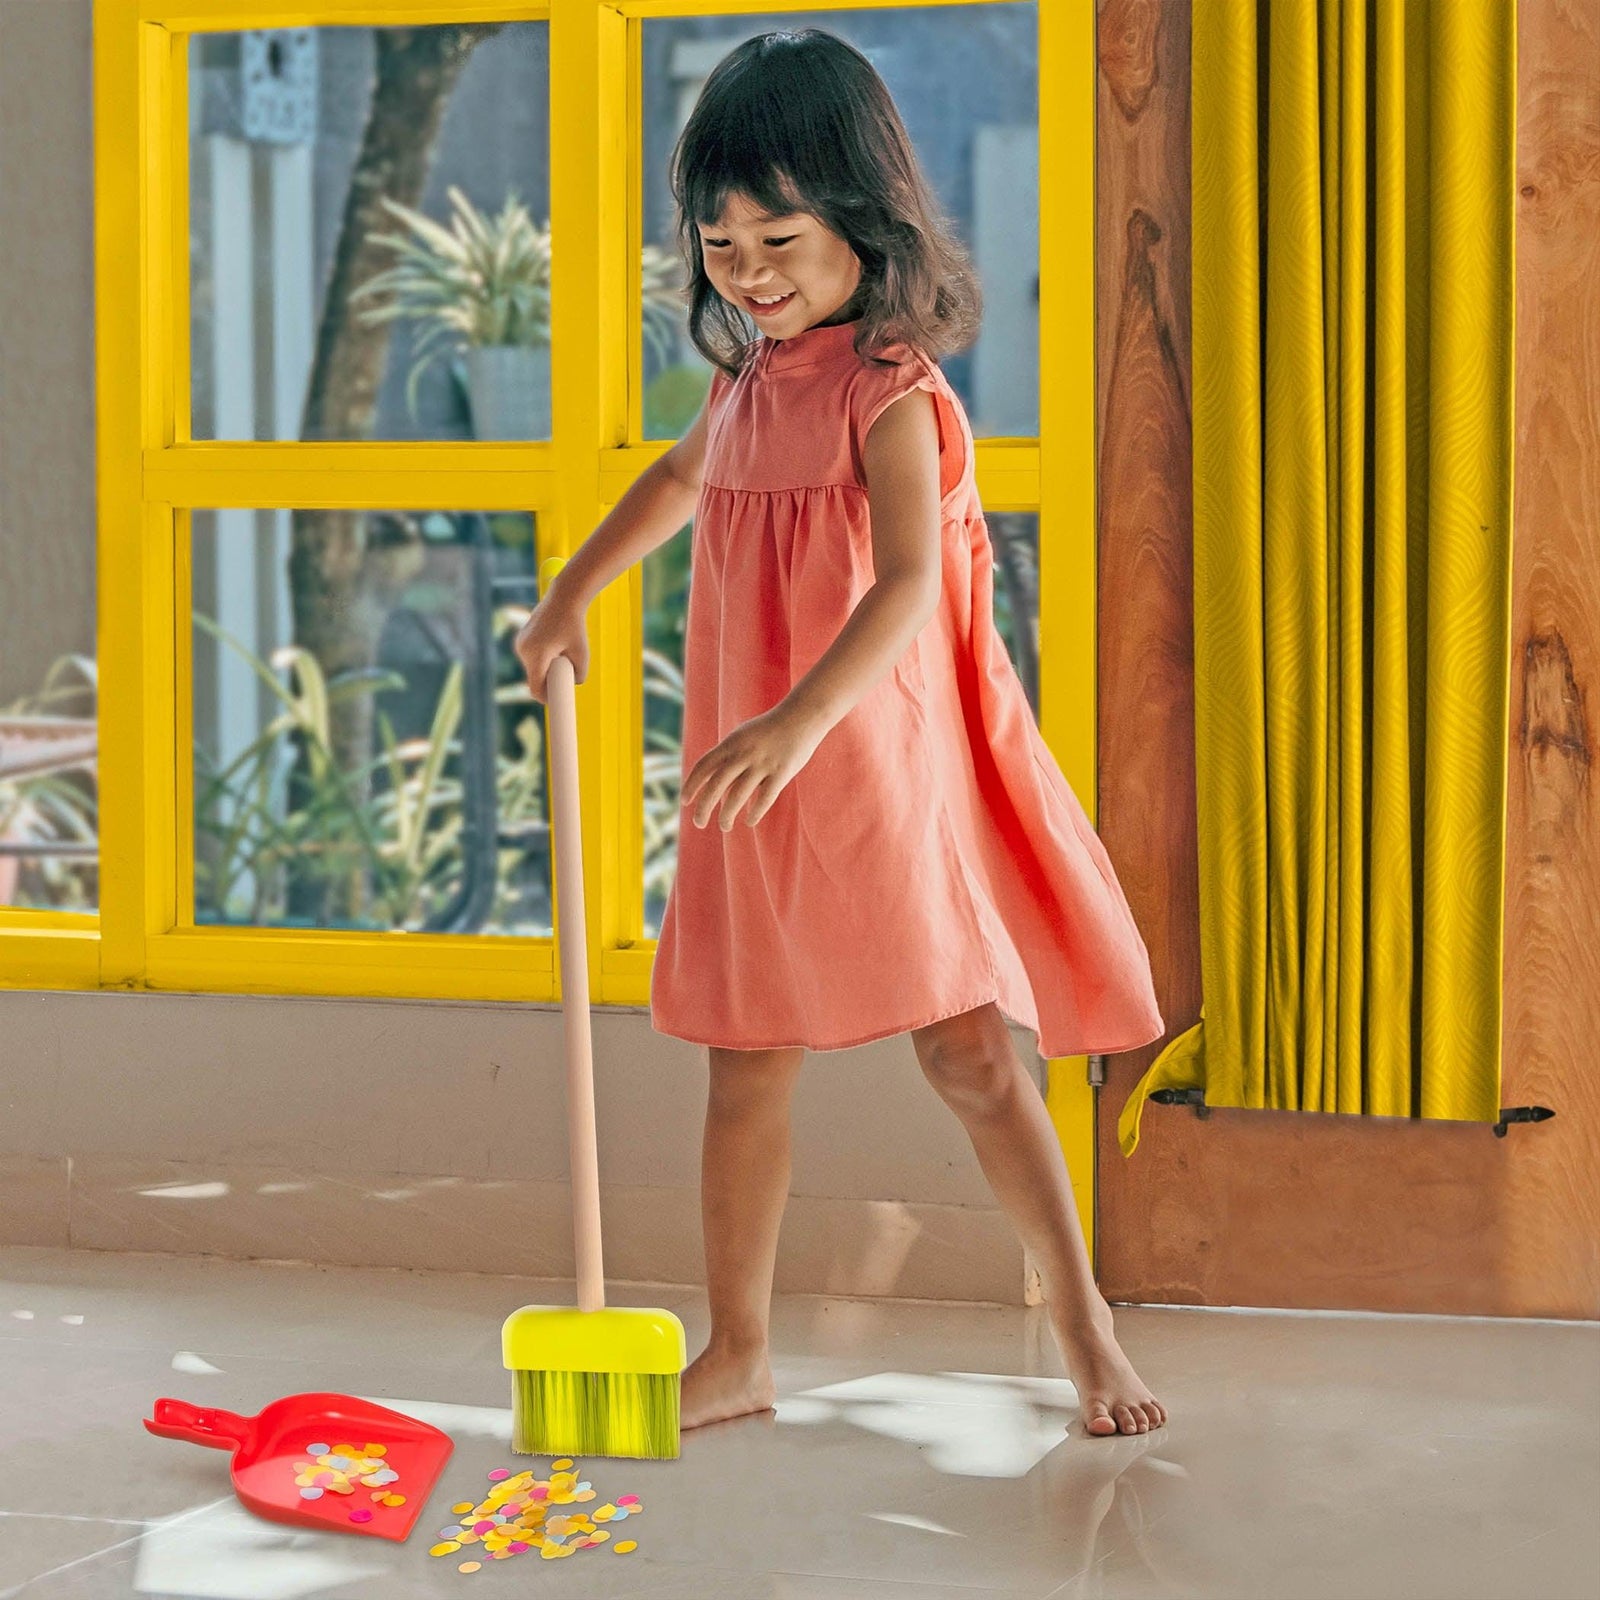 B.Toys: Clean'n'Play cleaning kit